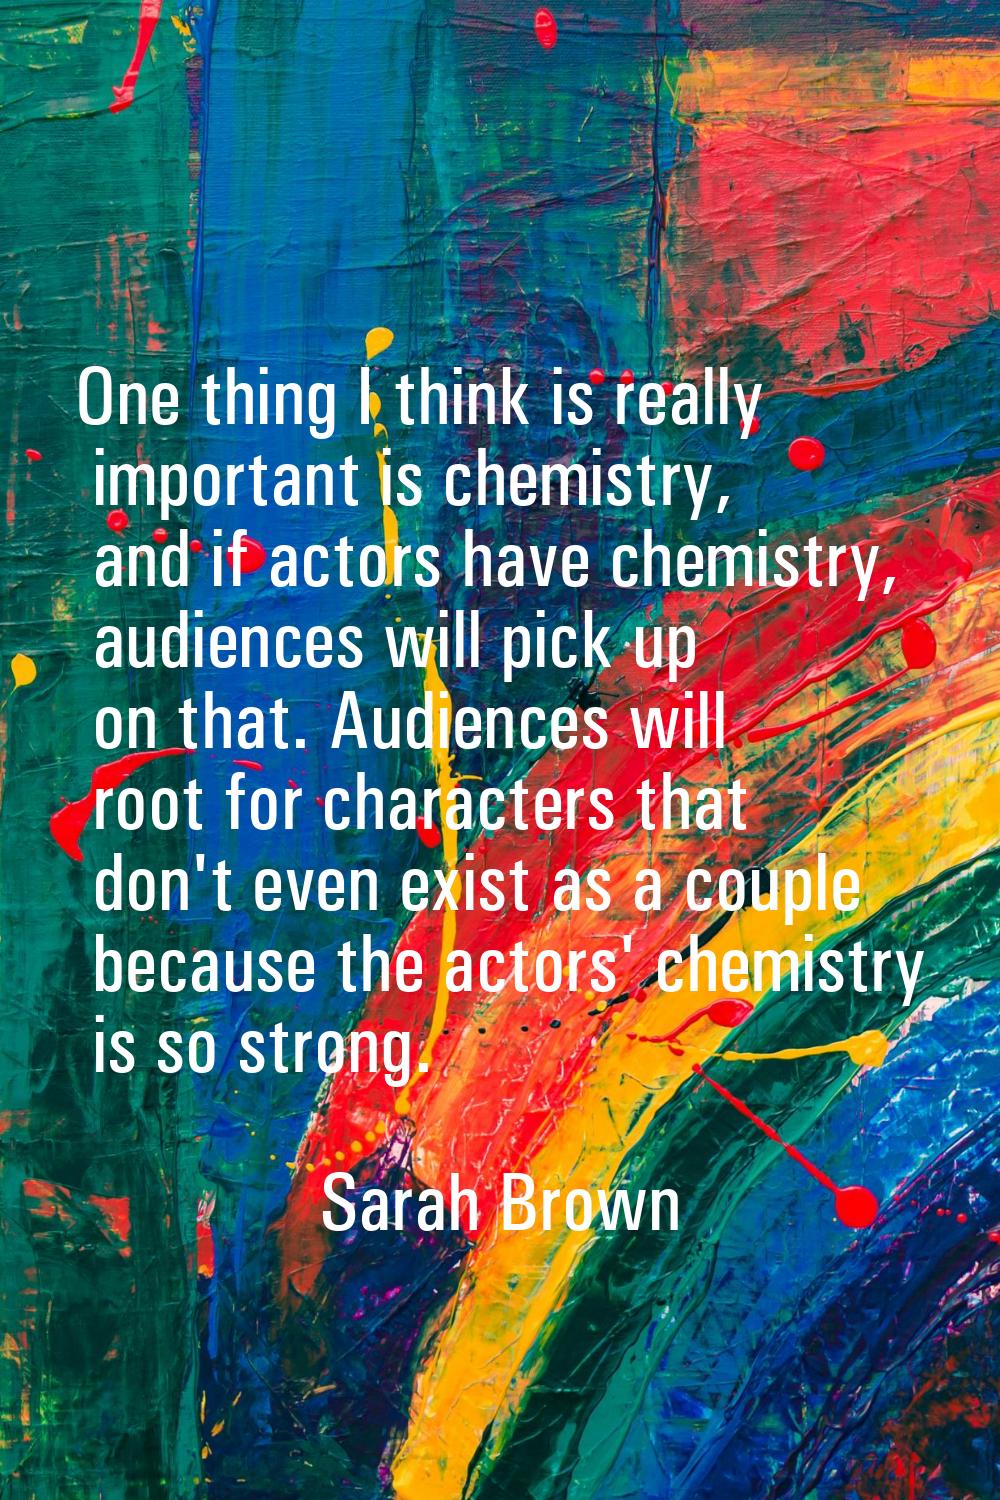 One thing I think is really important is chemistry, and if actors have chemistry, audiences will pi